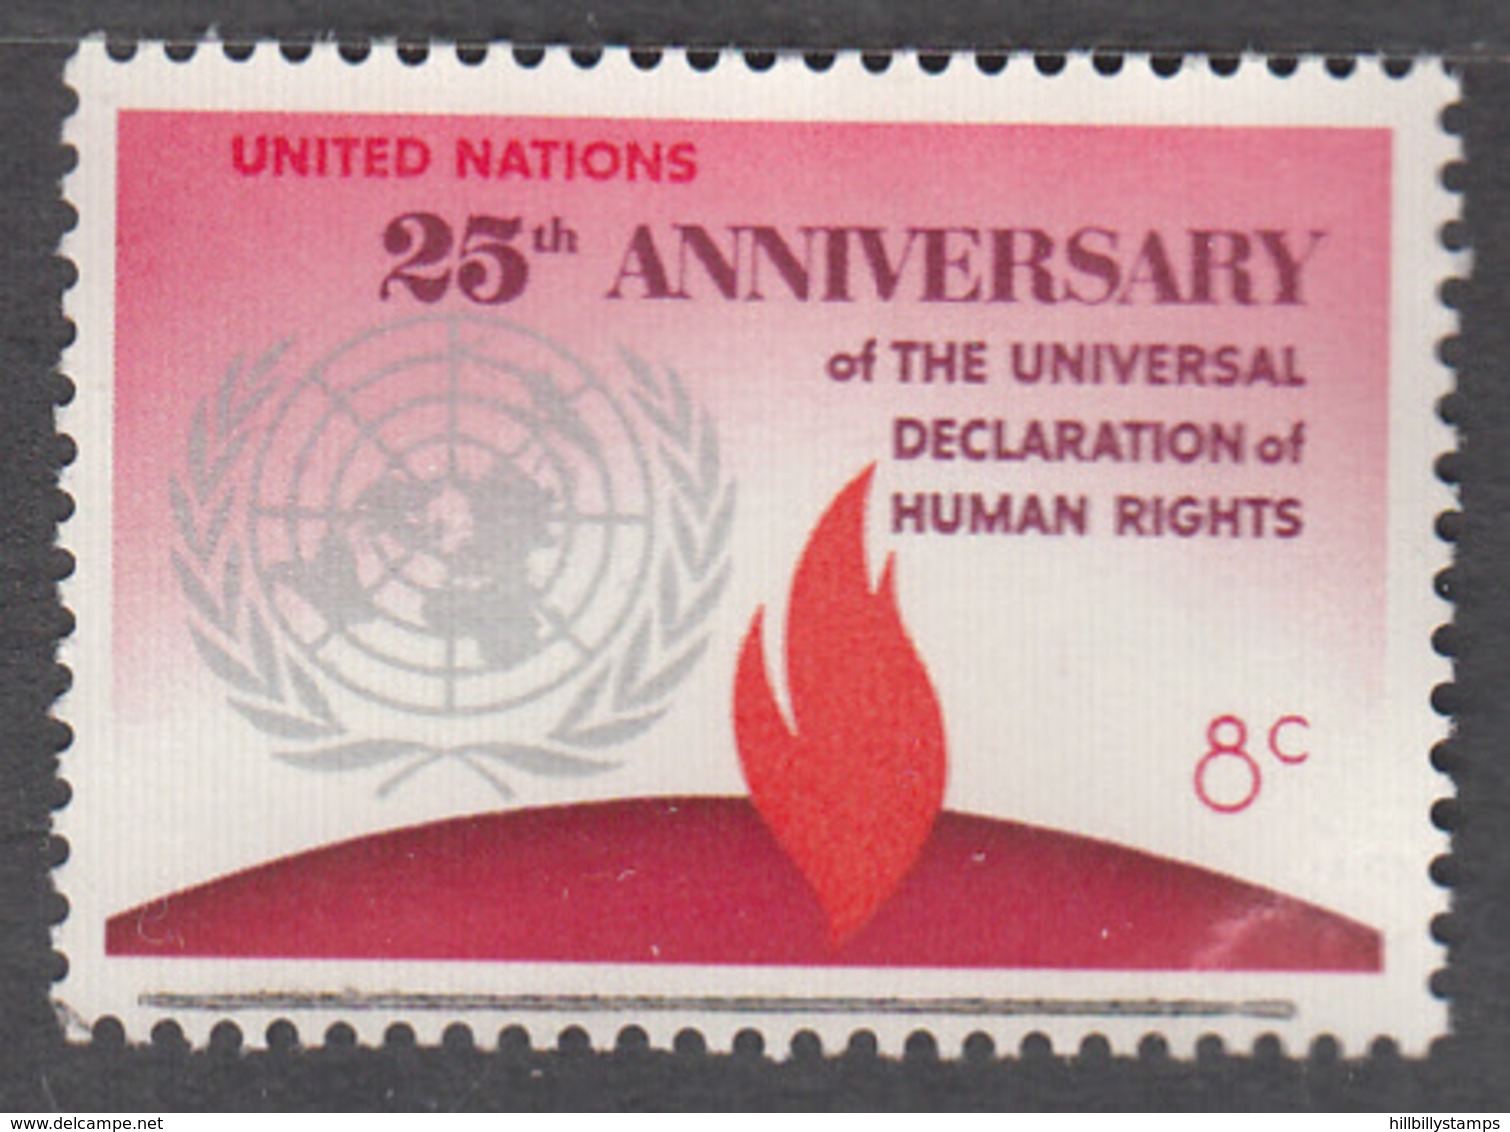 UNITED NATIONS    SCOTT NO. 242    USED     YEAR  1973 - Oblitérés